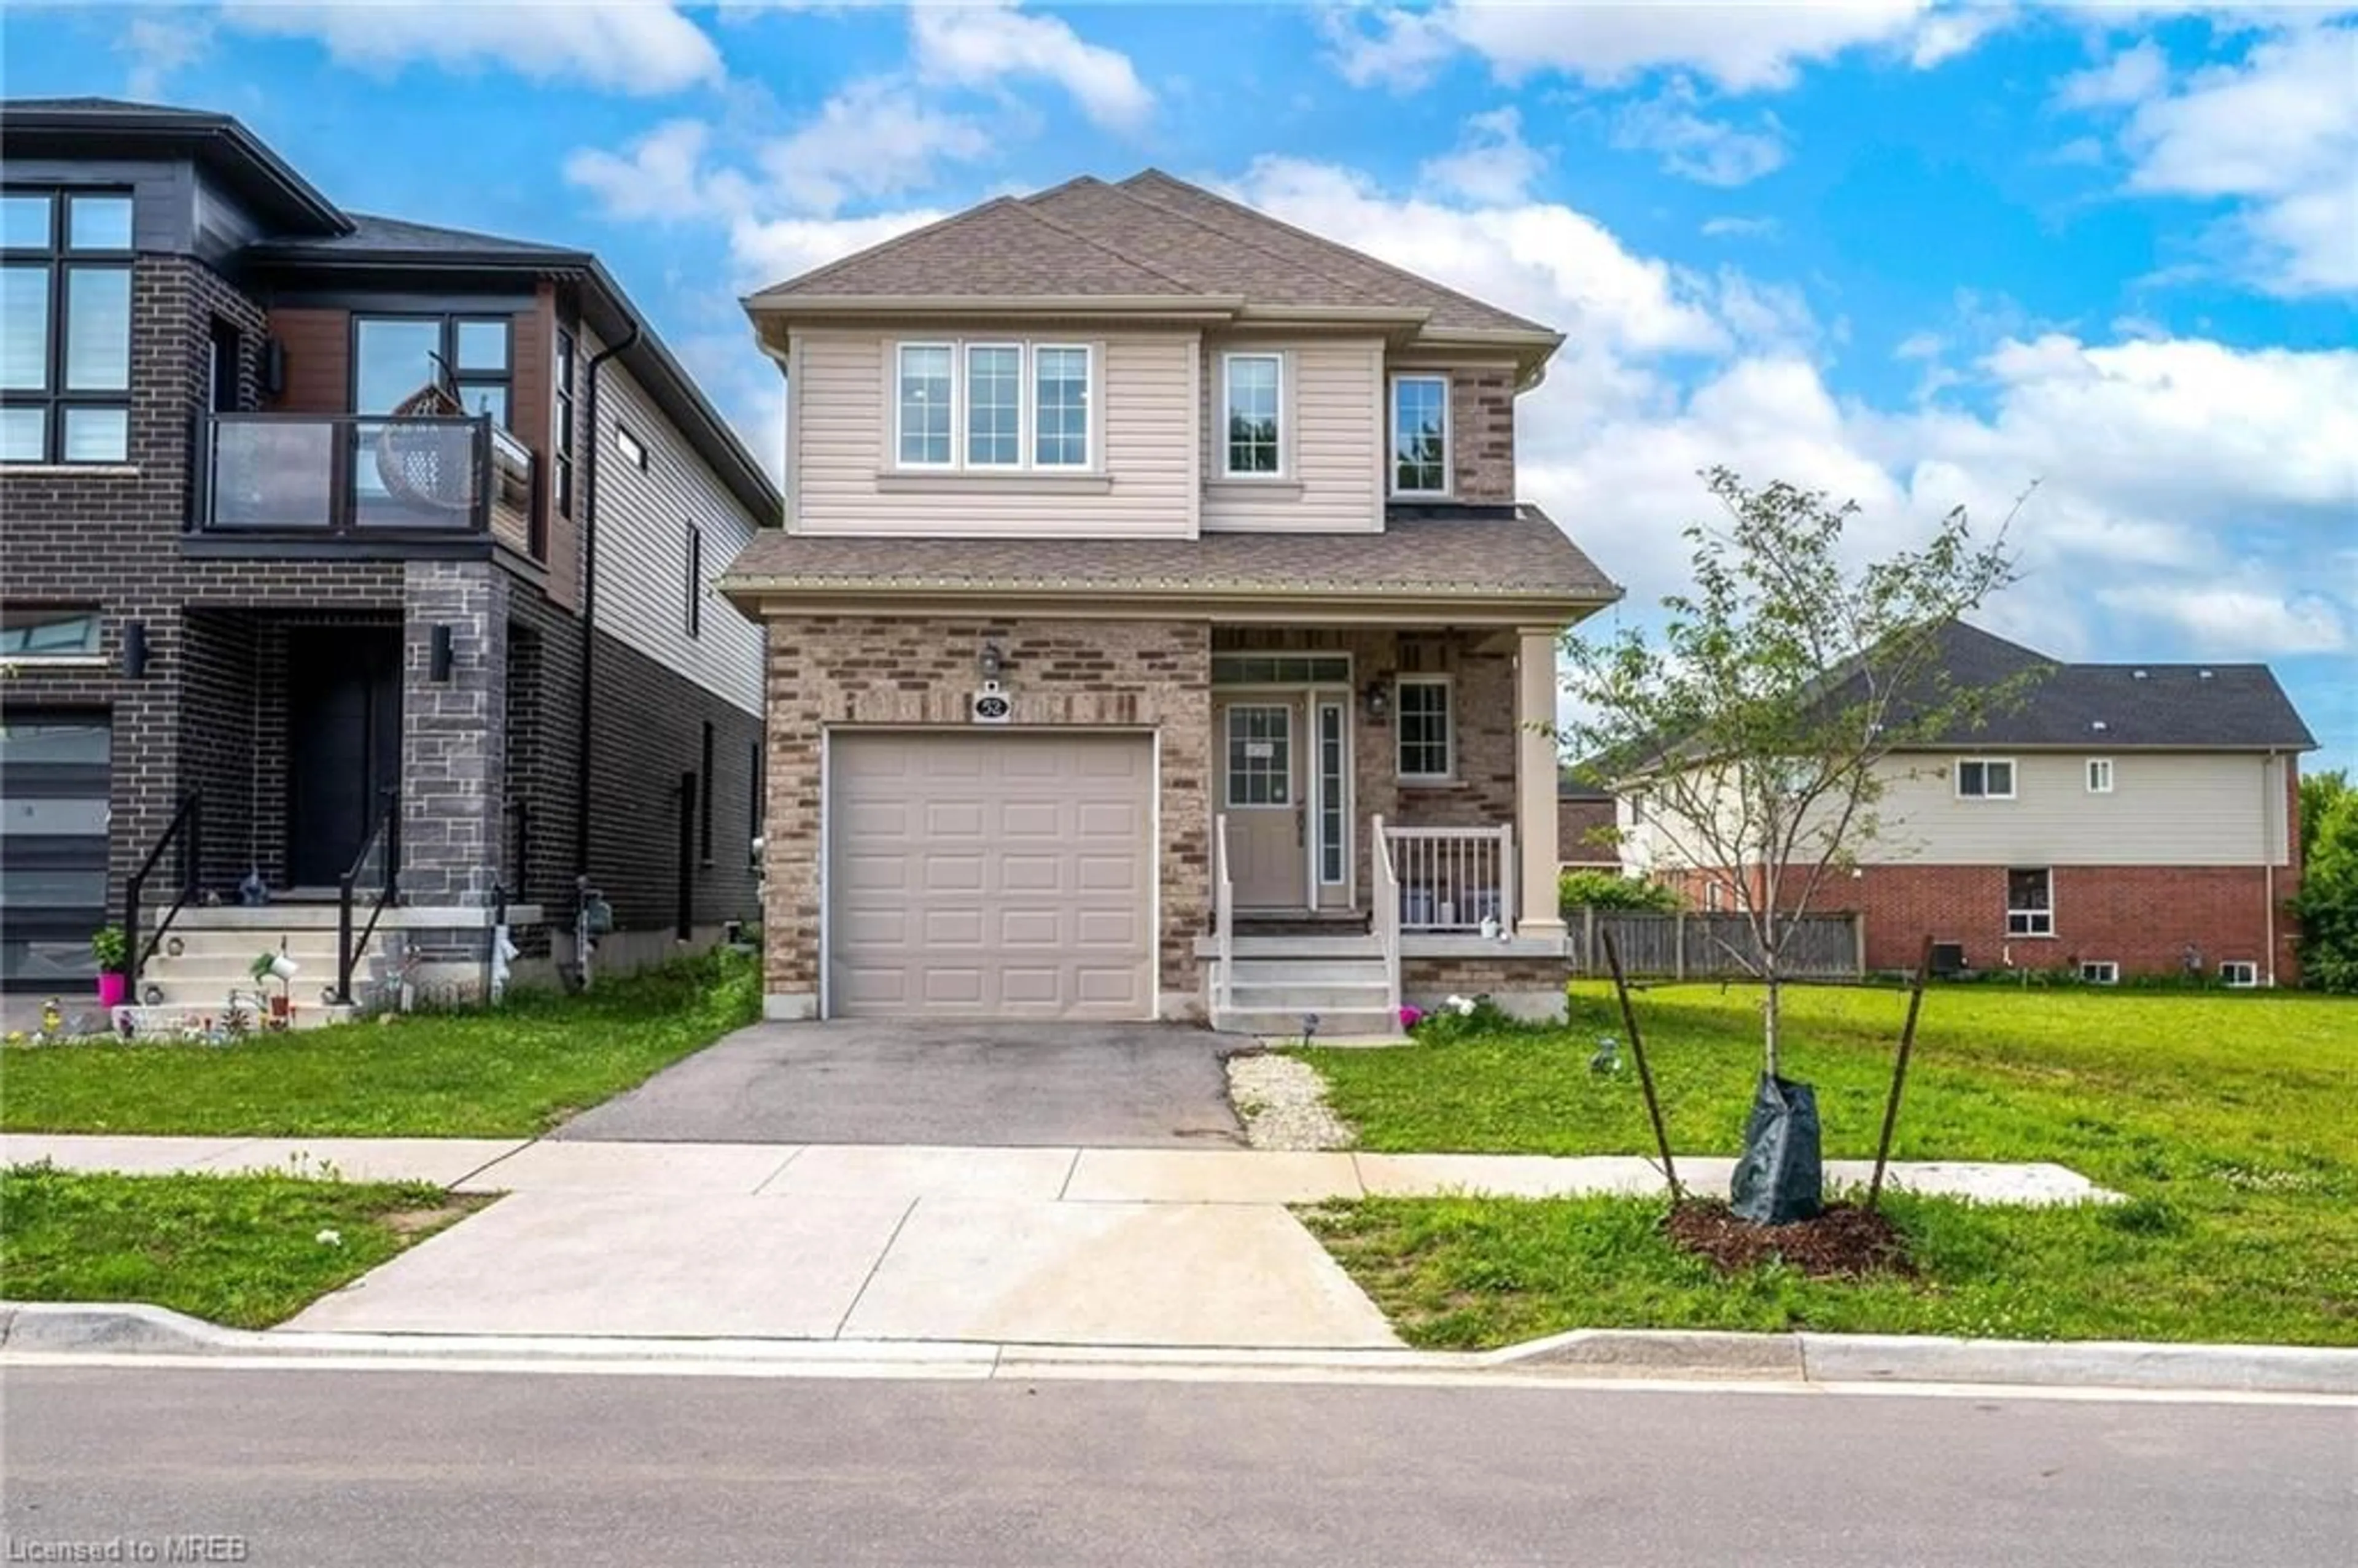 Frontside or backside of a home for 52 Monarch Woods Dr, Kitchener Ontario N2P 2Y9